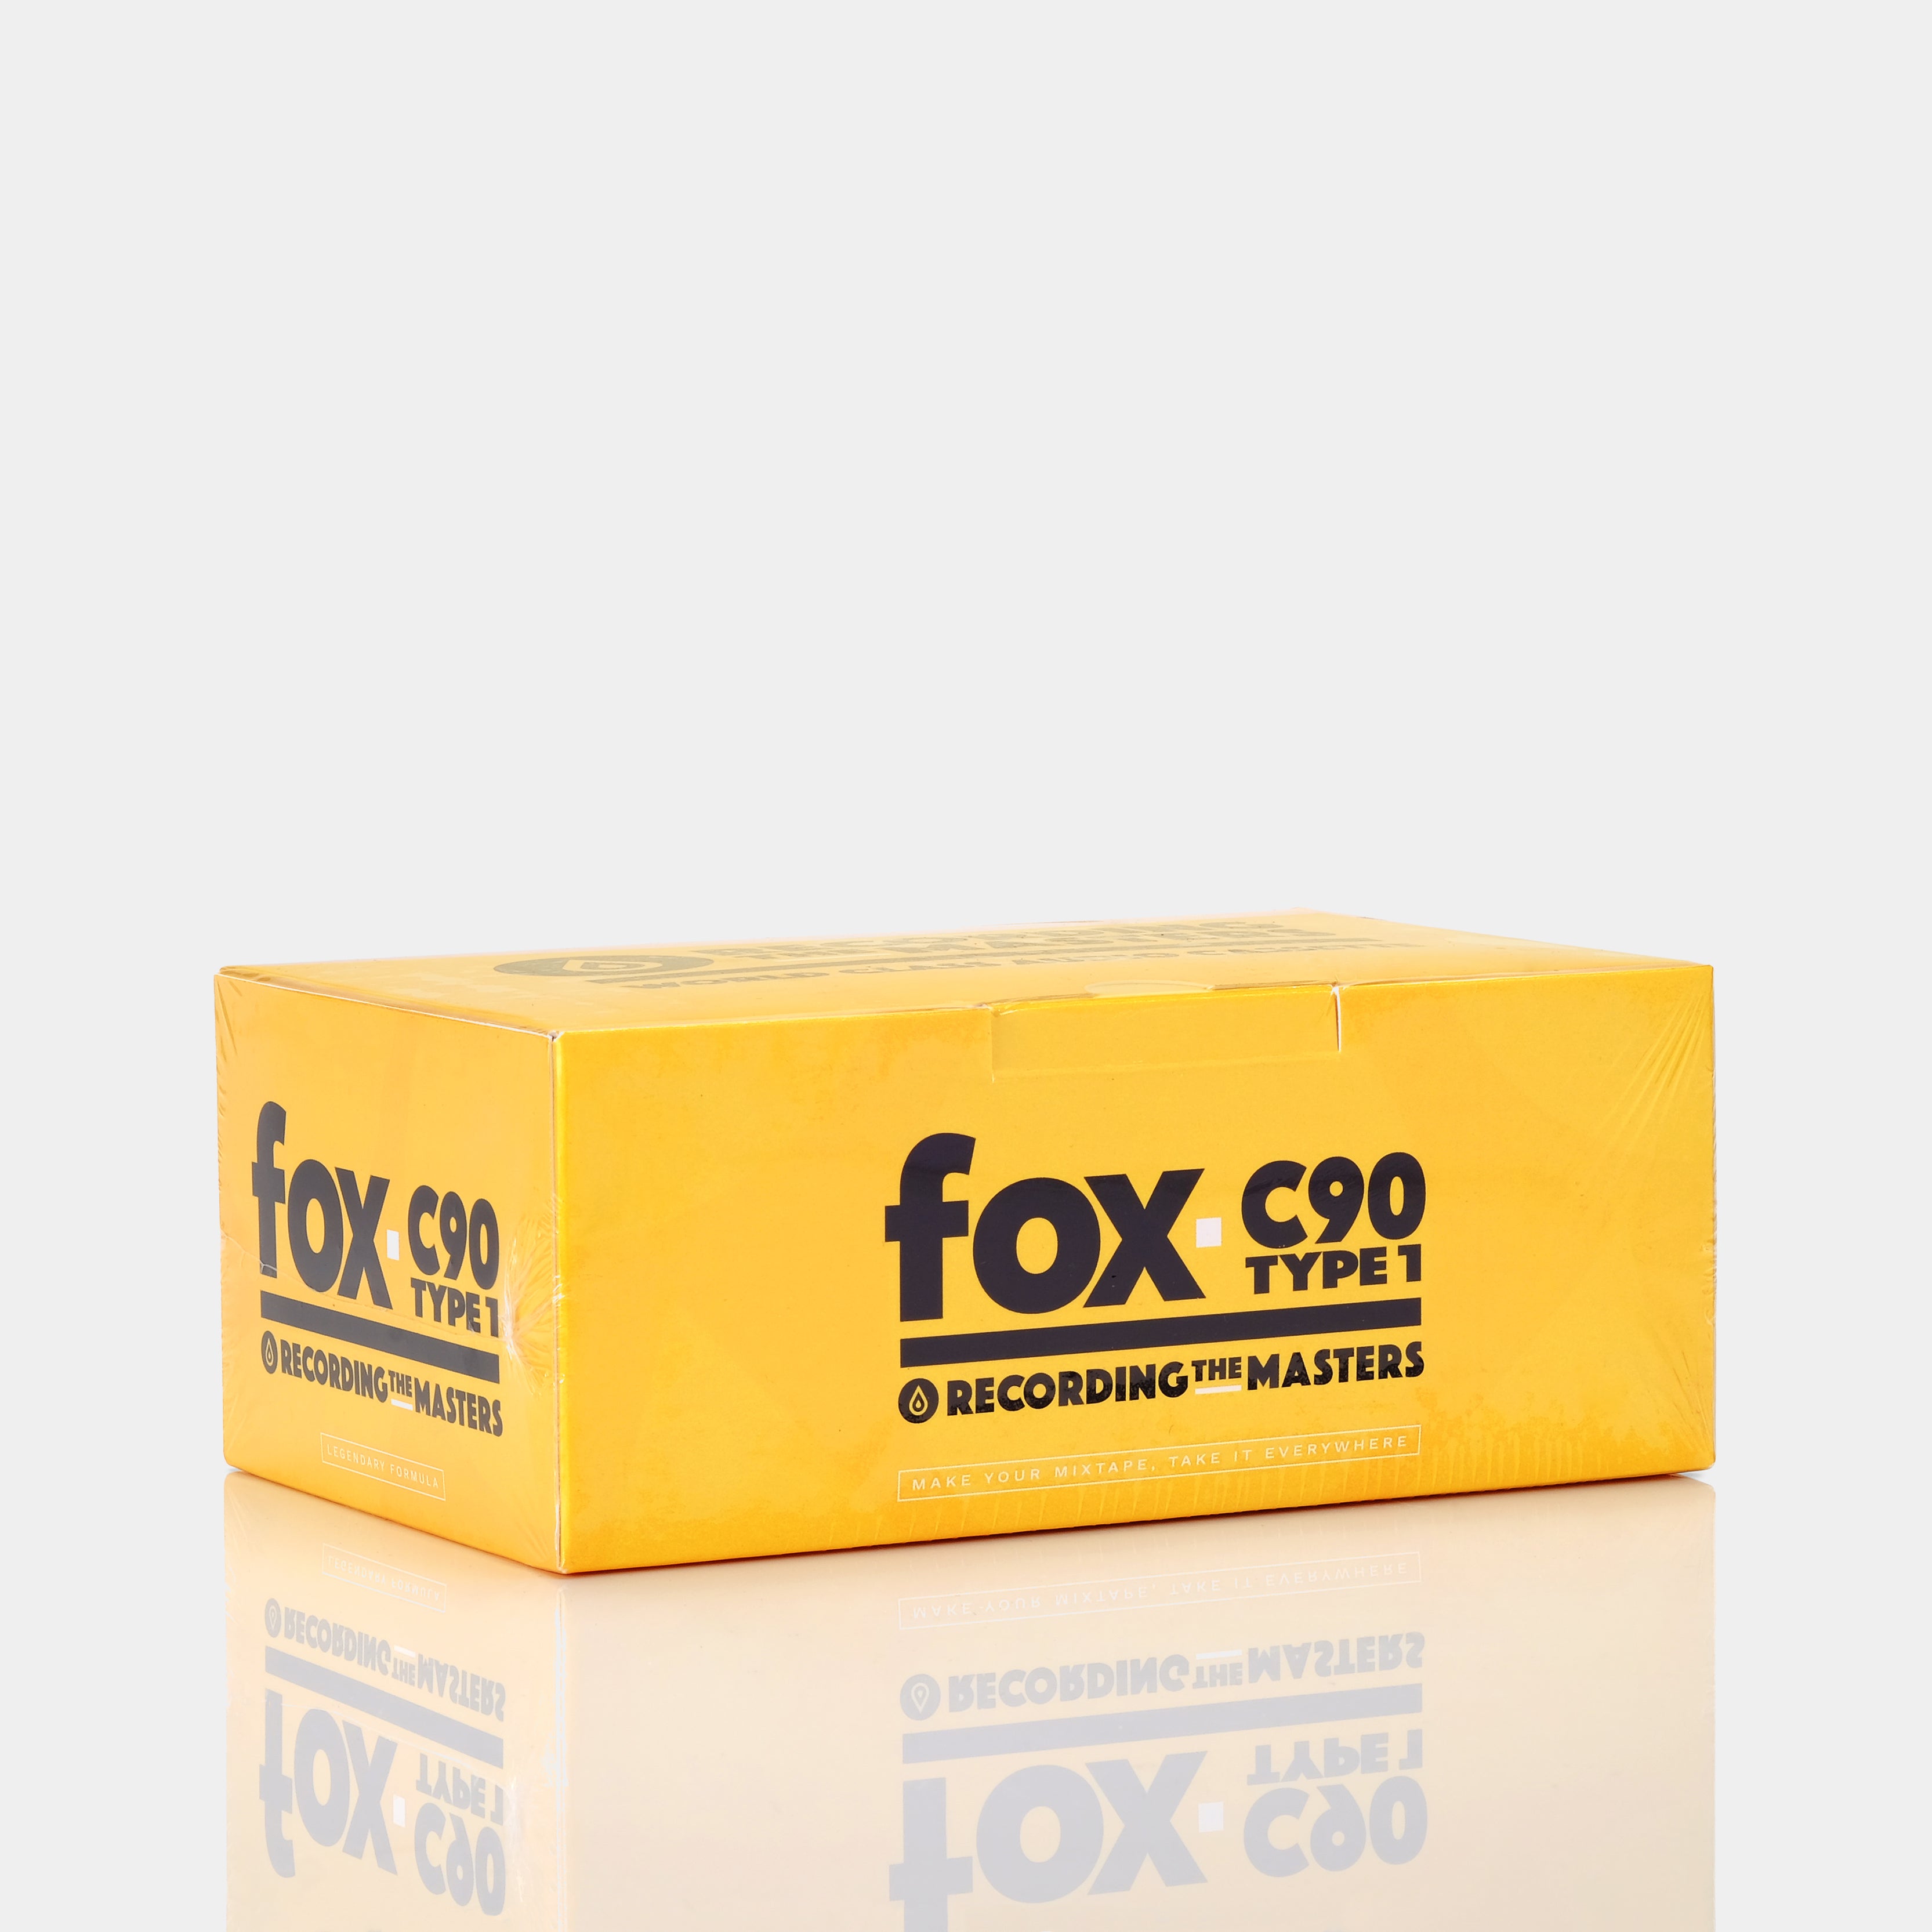 Fox C90 Type I Blank Recordable Cassette Tapes (10 Pack)